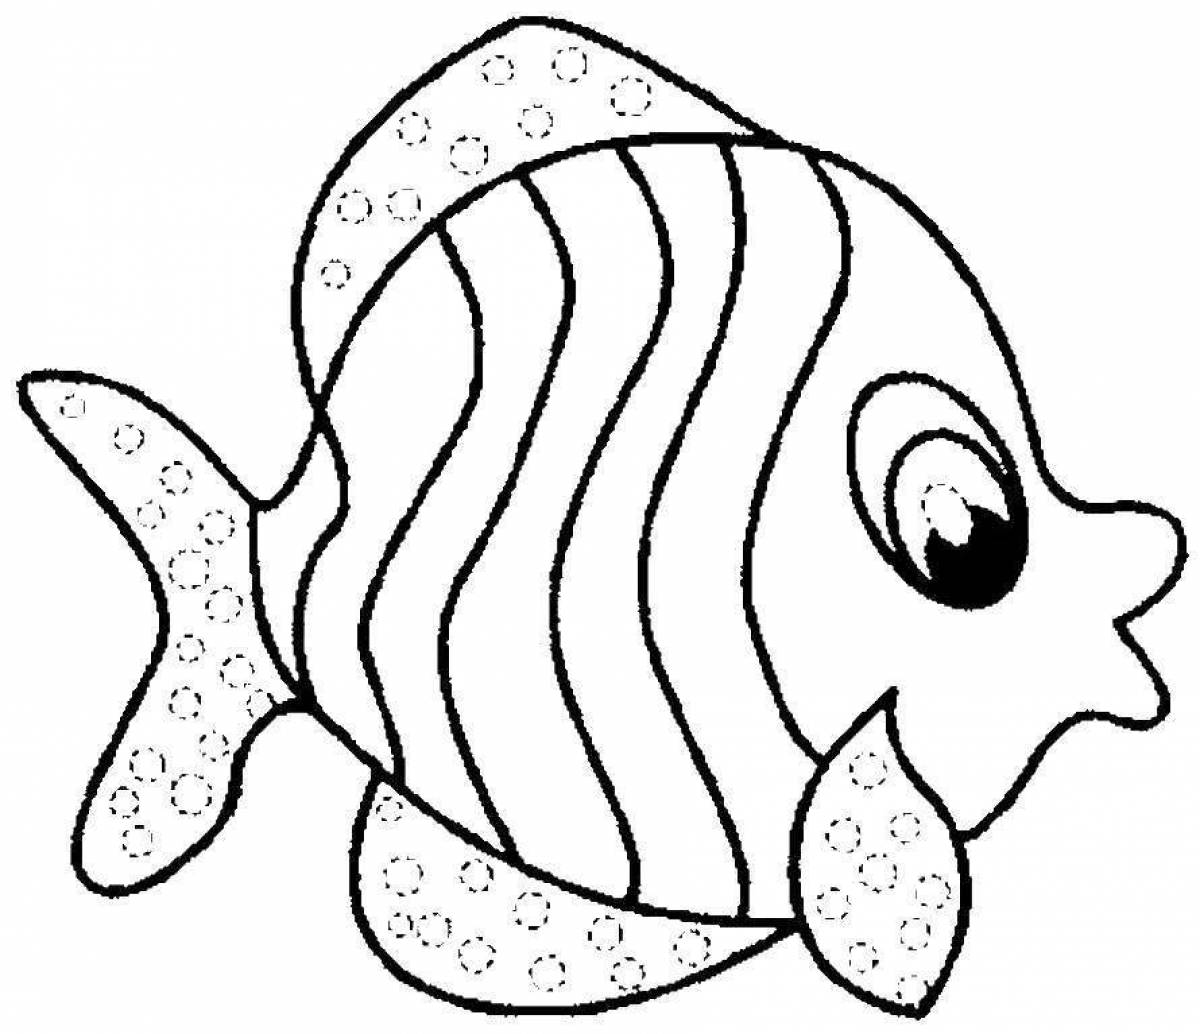 Creative fish coloring book for 4-5 year olds